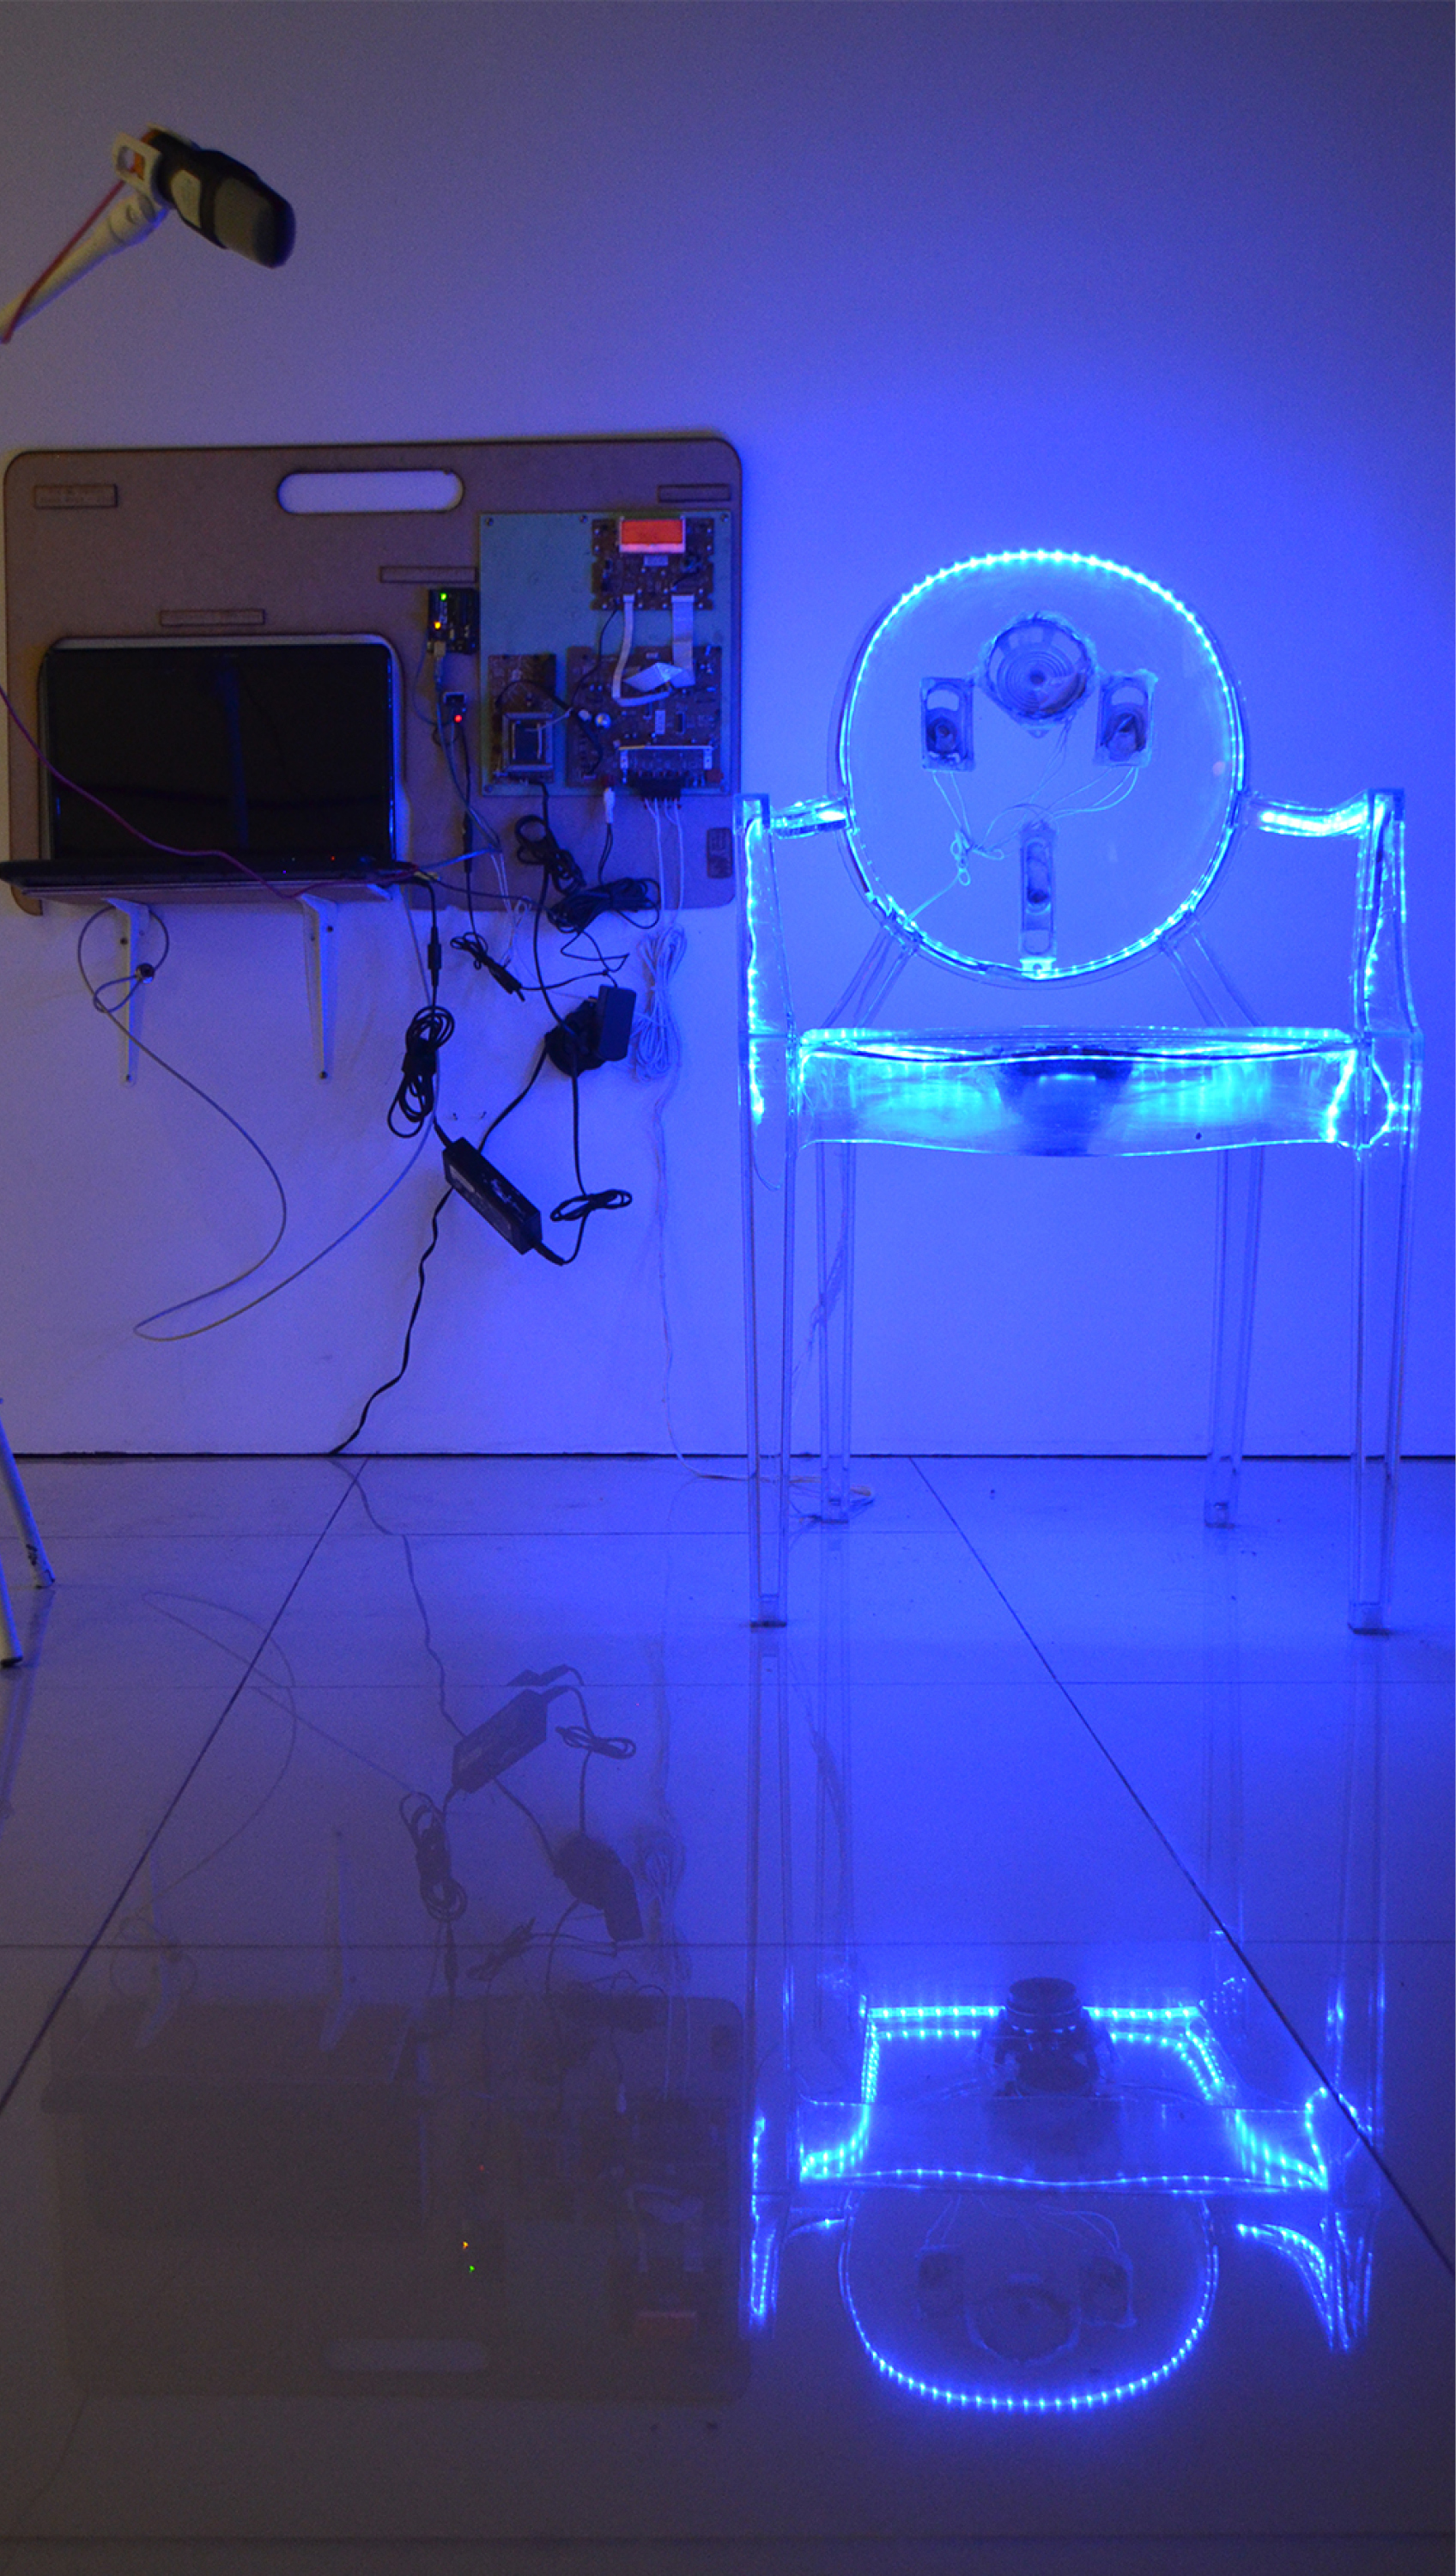 Photo of 'Inside Voice' (2018) displaying a microphone next to a transparent acrylic chair lit up in blue. In the back, there is a panel on a wall holding a computer and a set of wires and electronics. (Photo: Carina Macedo)